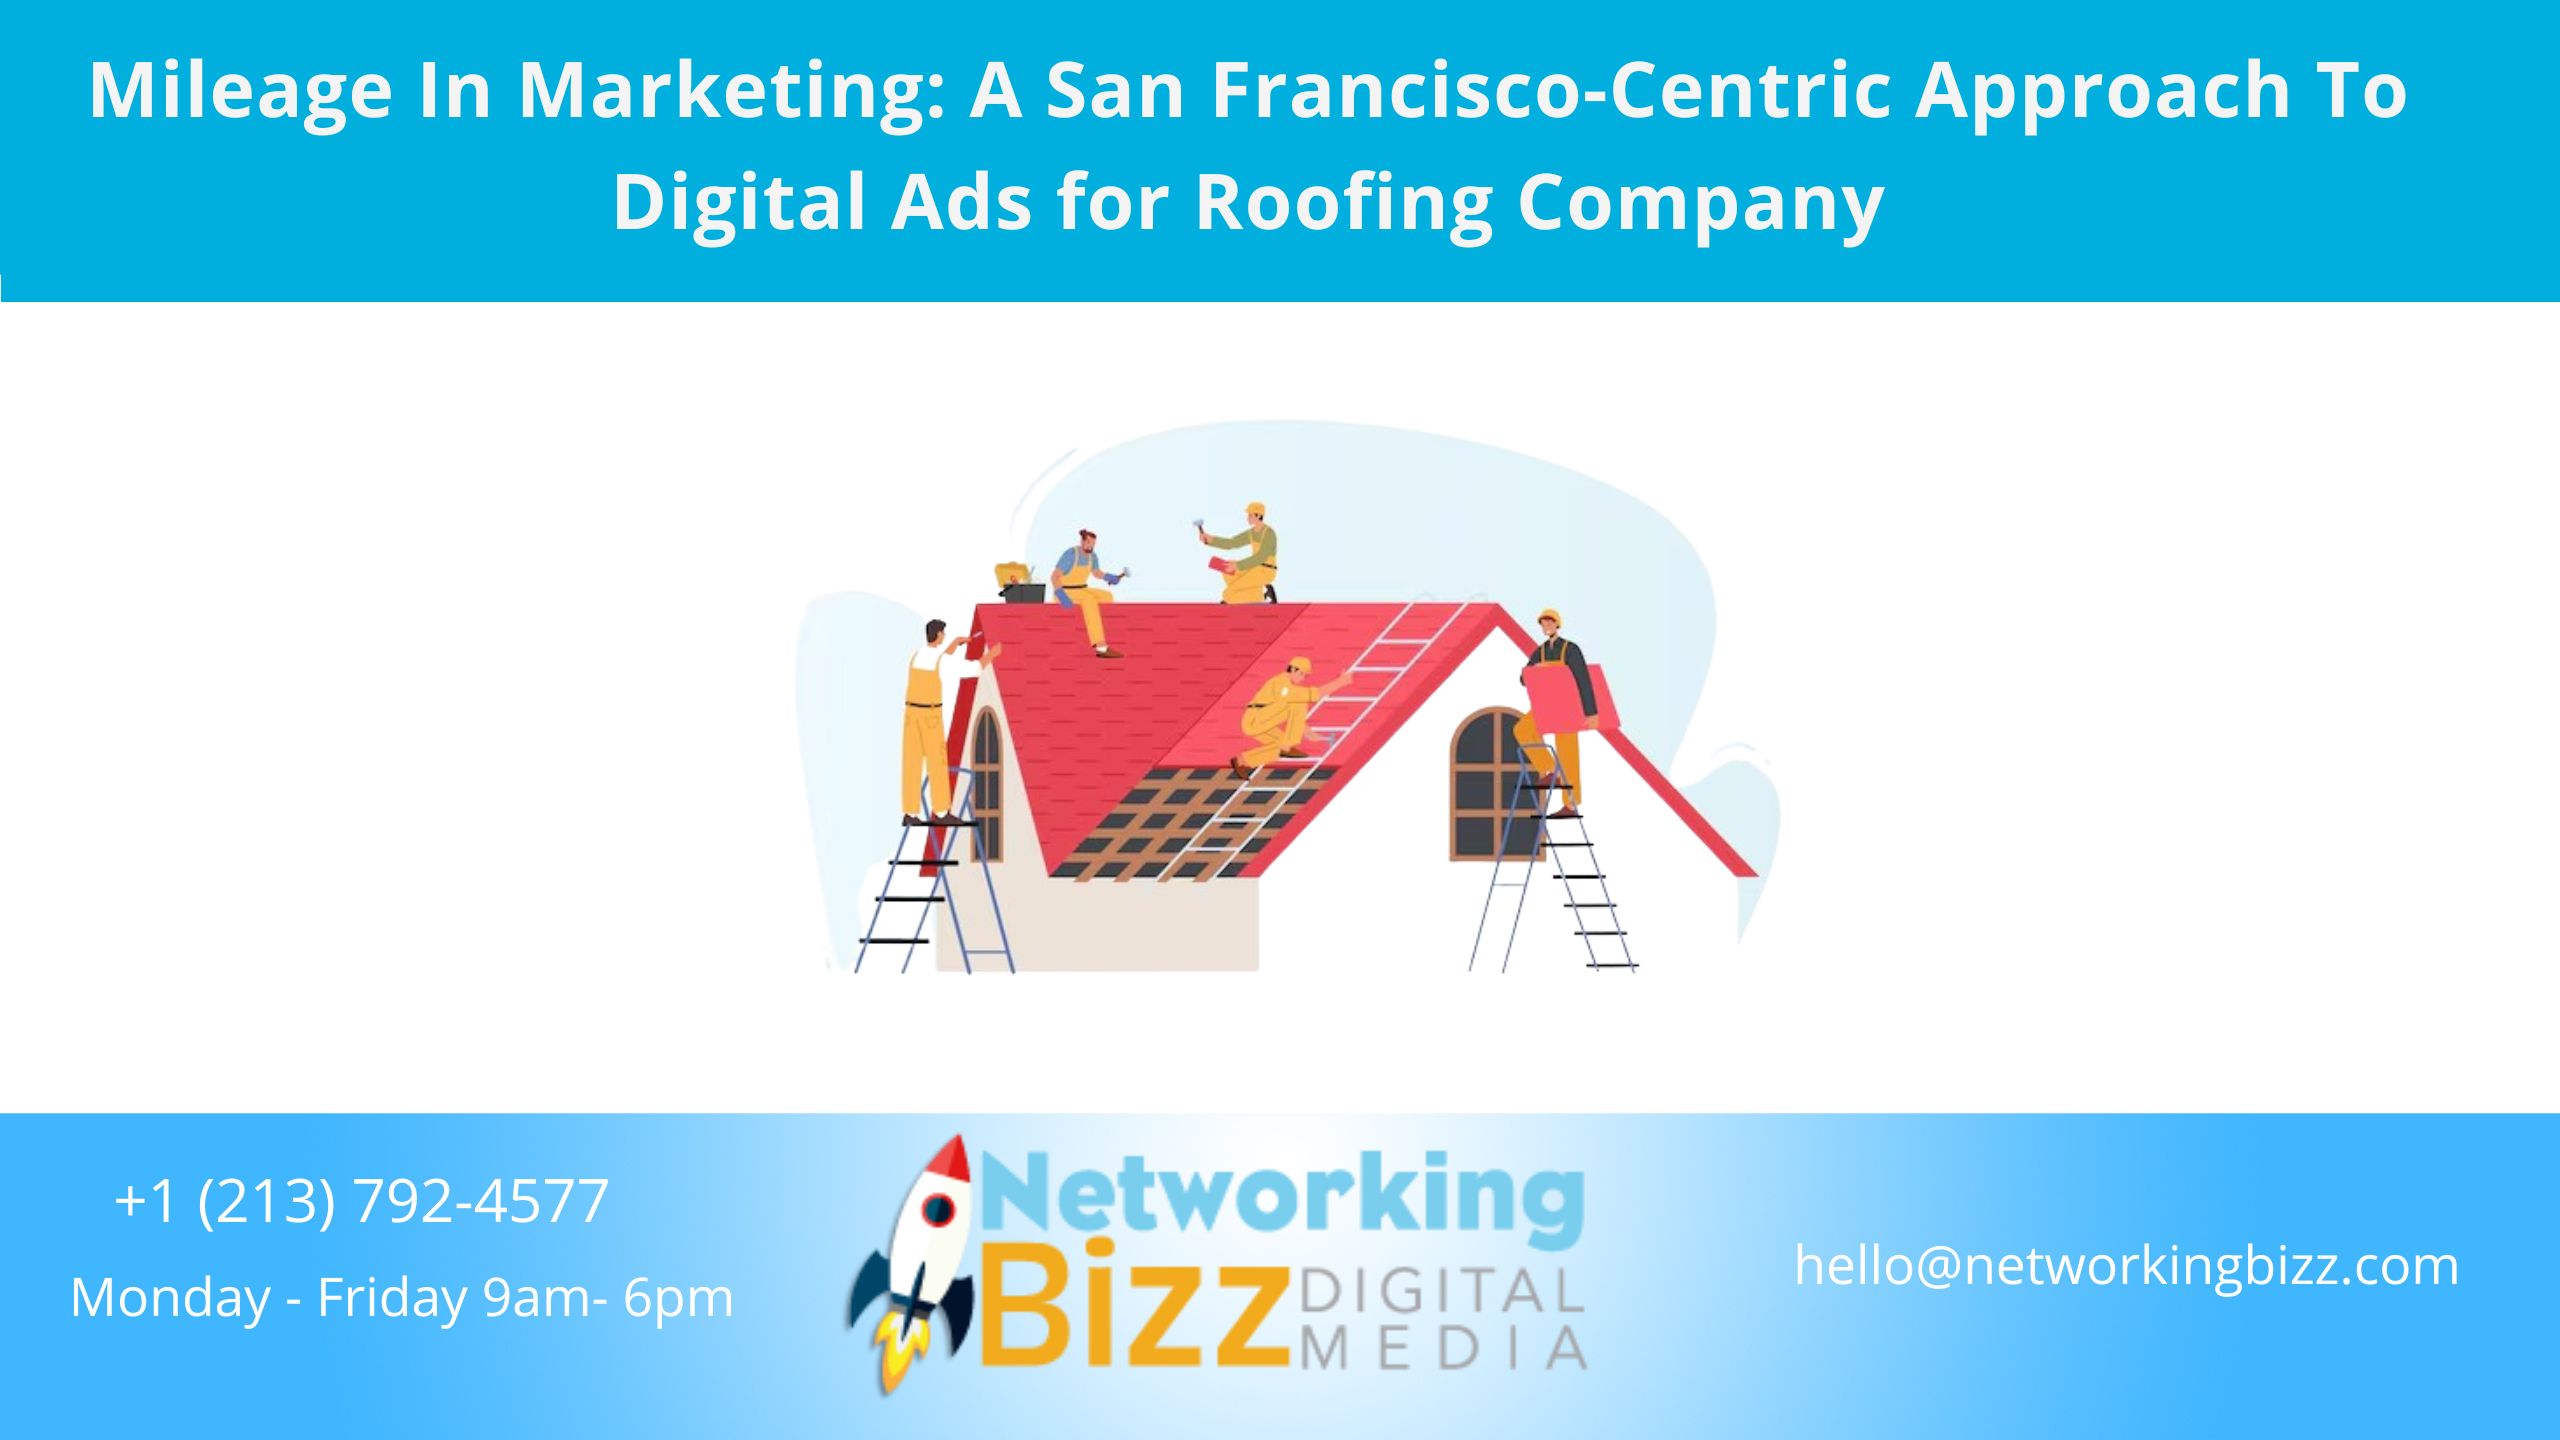 Mileage In Marketing: A San Francisco-Centric Approach To Digital Ads for Roofing Company